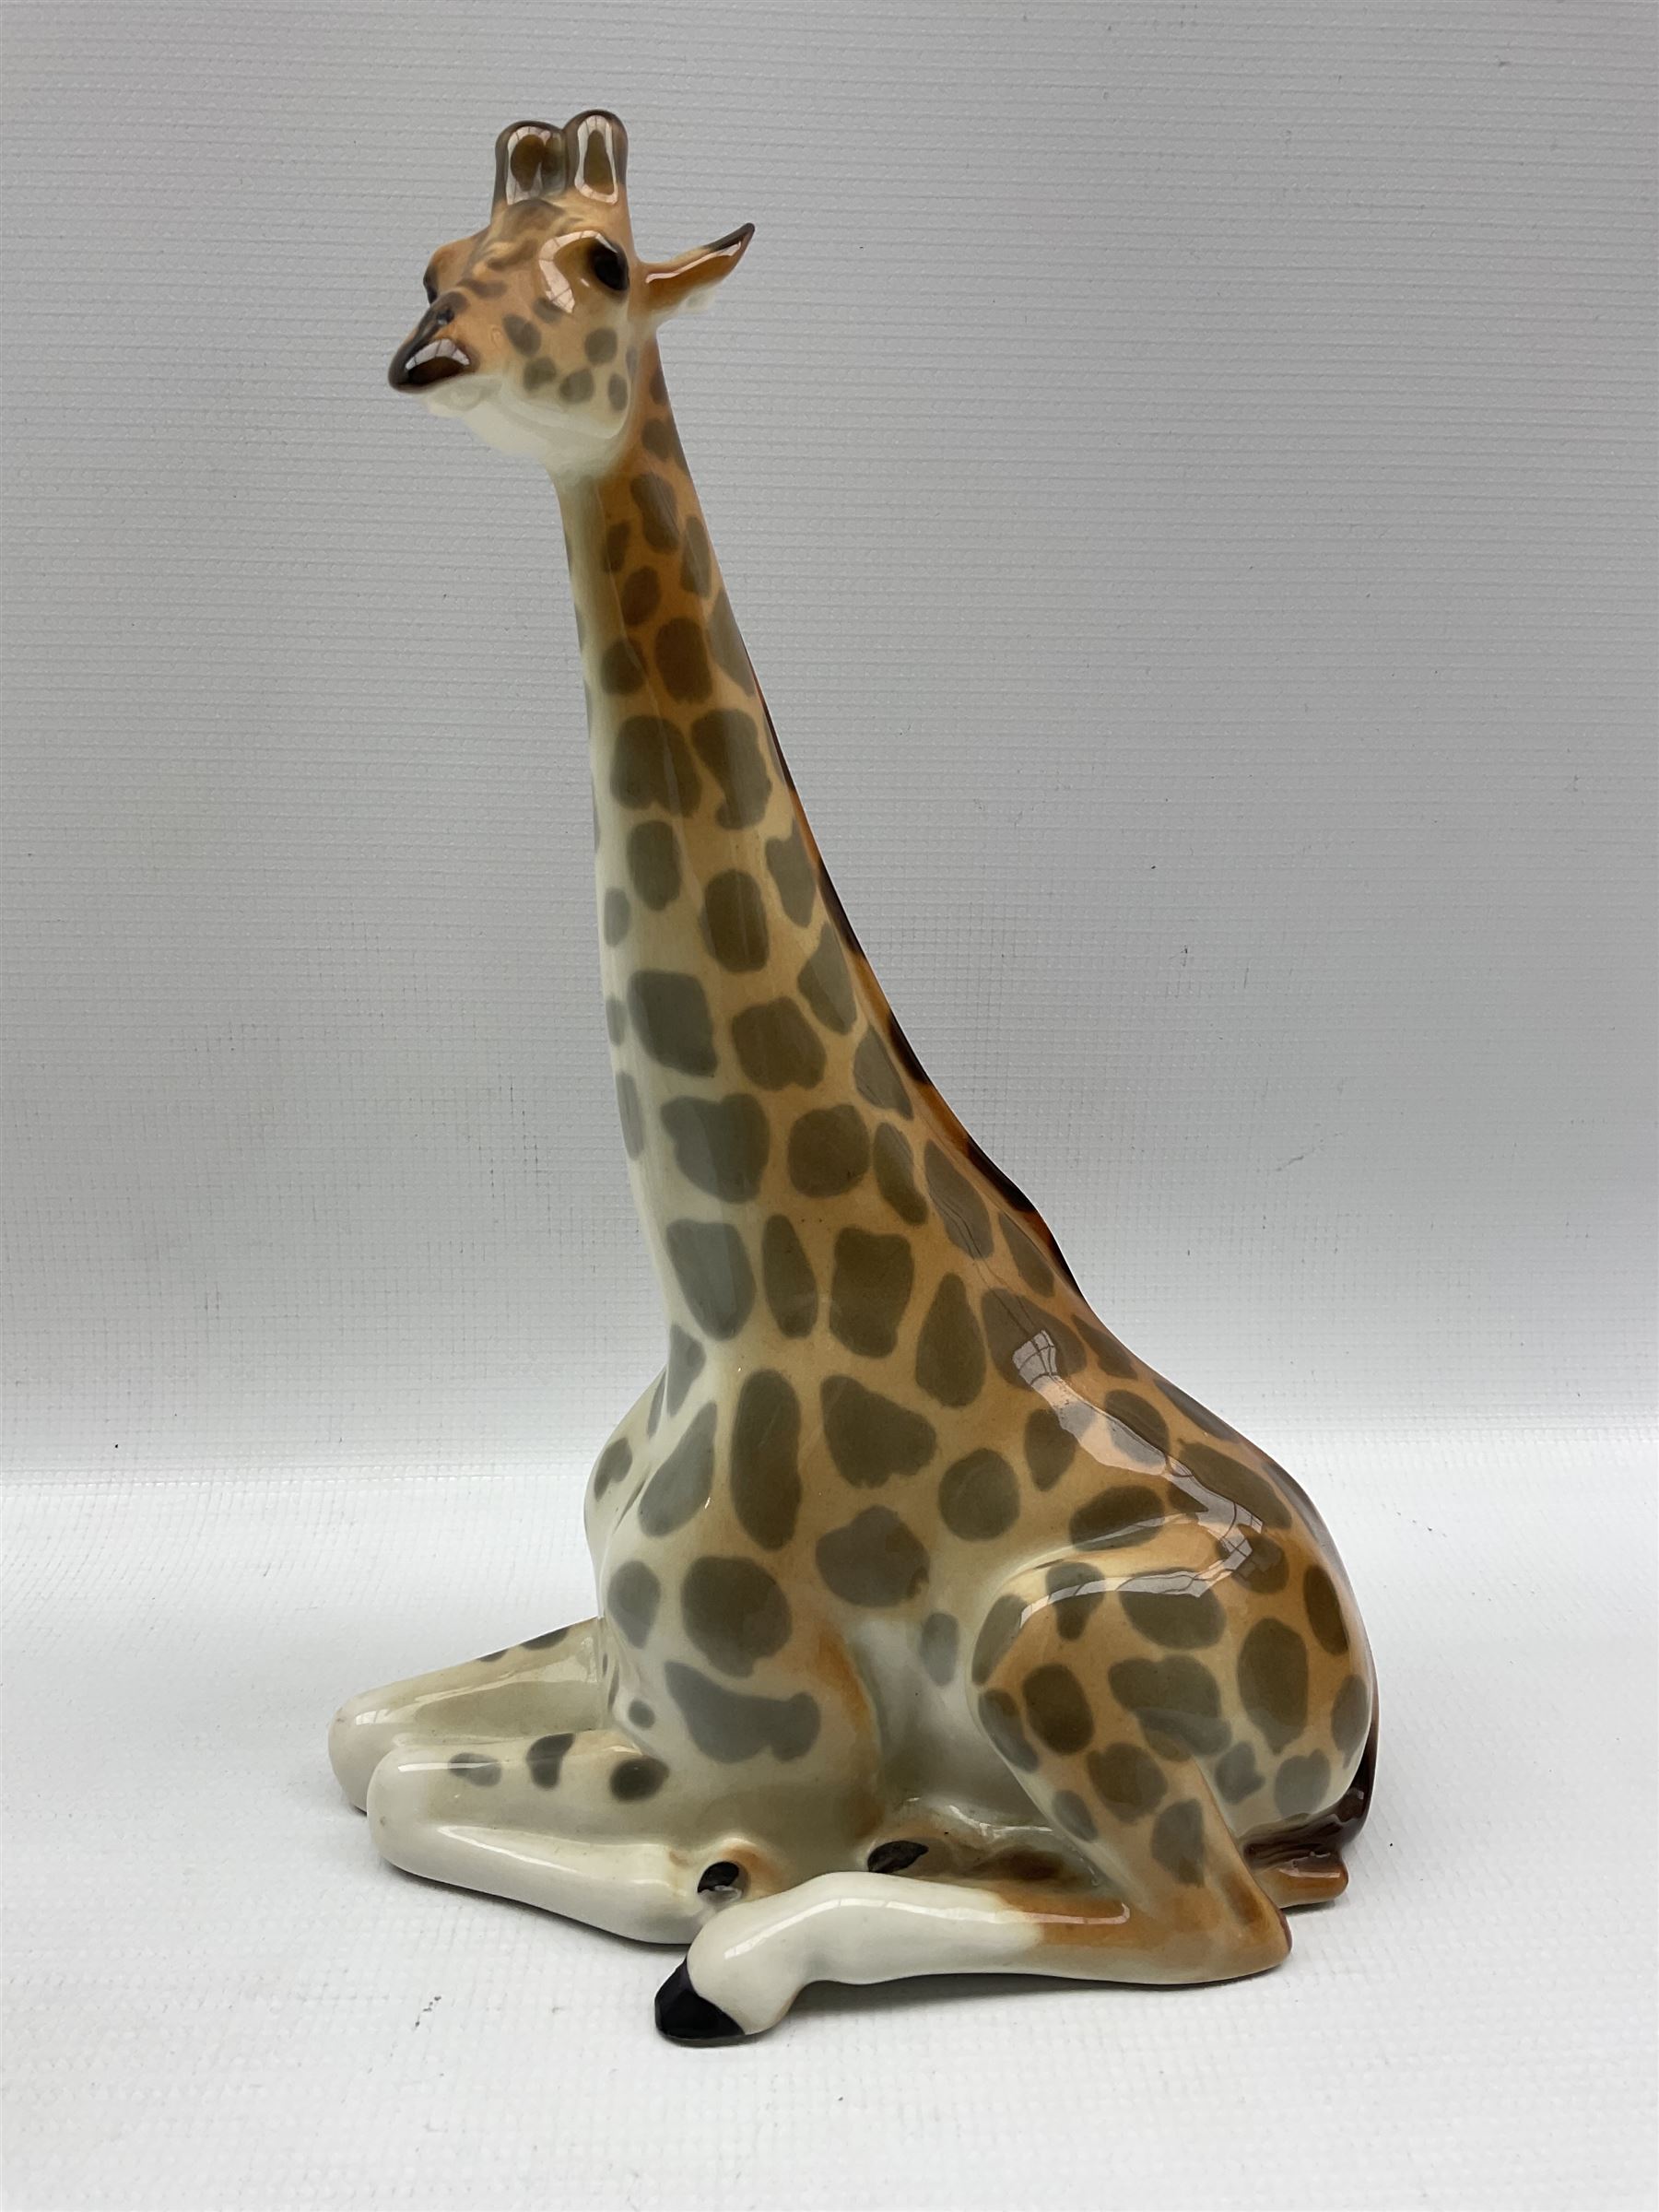 USSR Lomonosov model of resting giraffe pair together with small zebra and 4 other small models max - Image 2 of 3